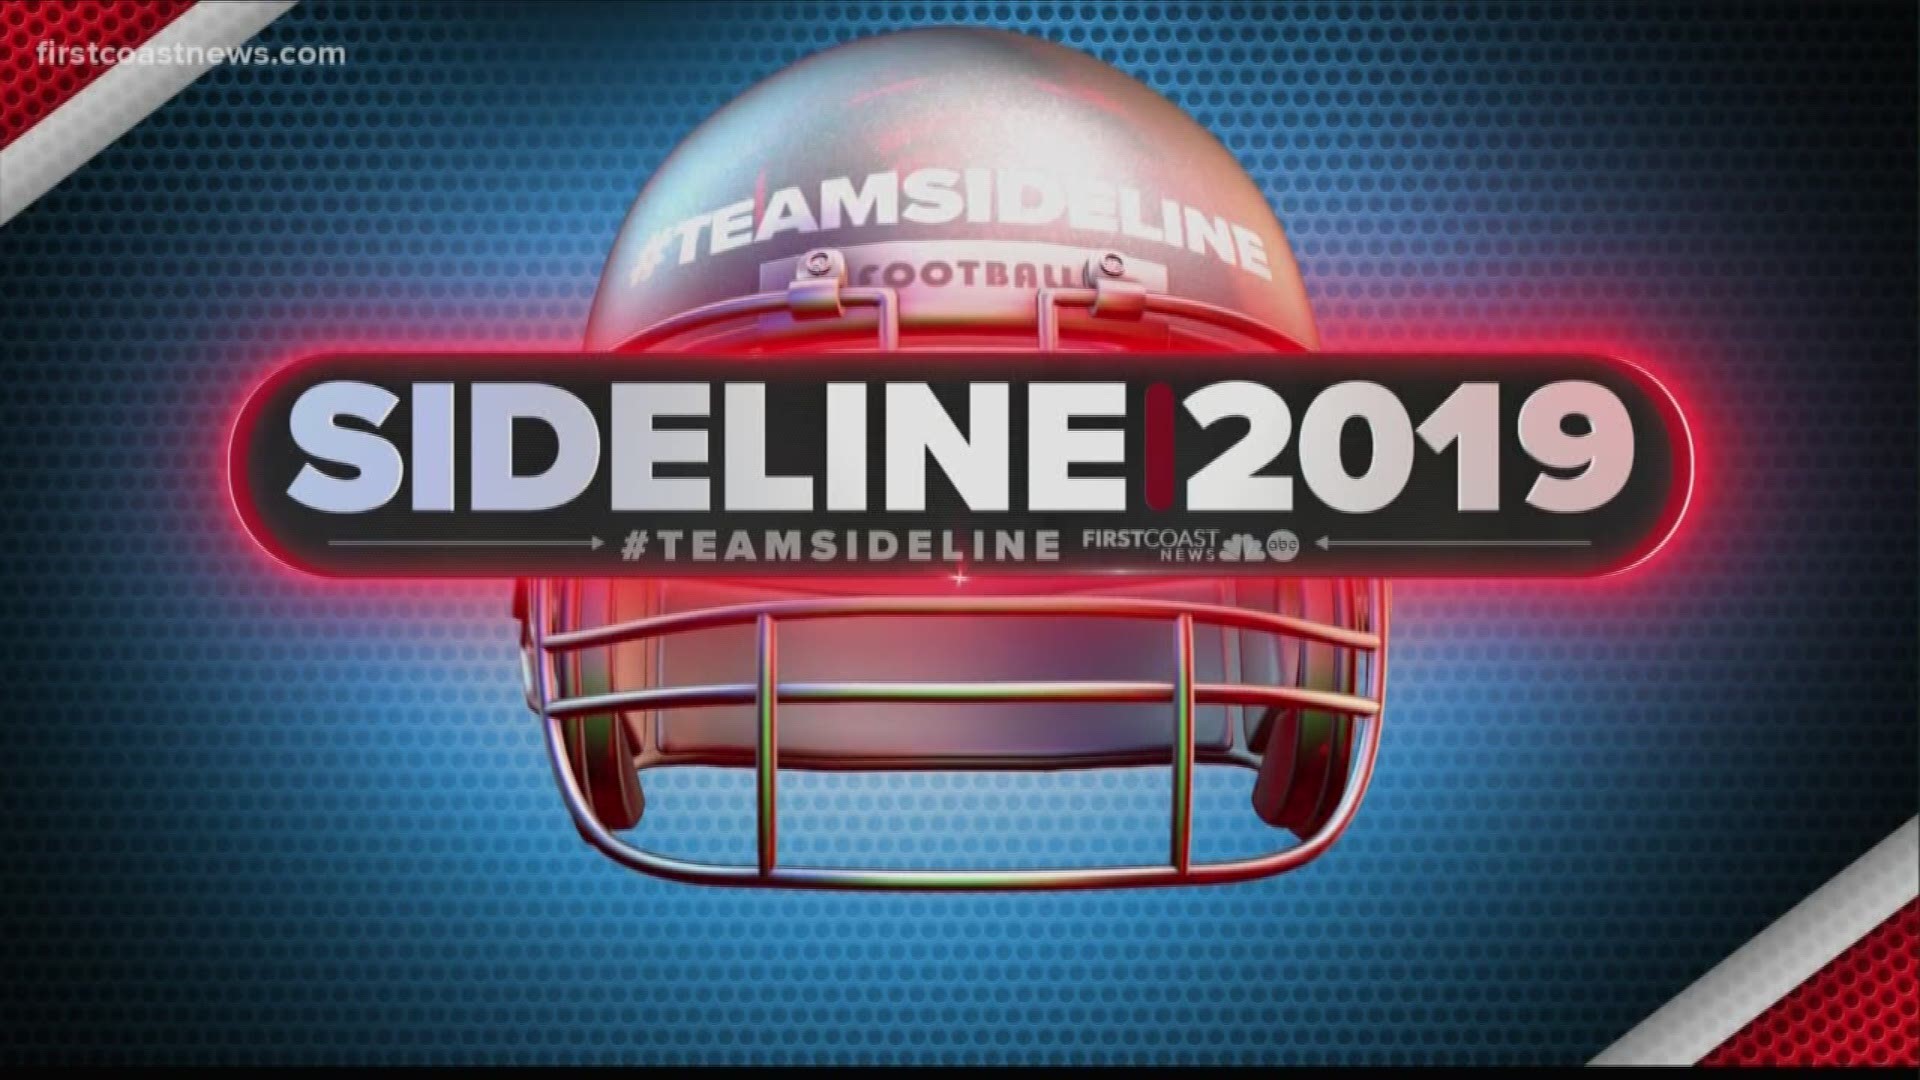 Highlights of the season finale of Sideline 2019.